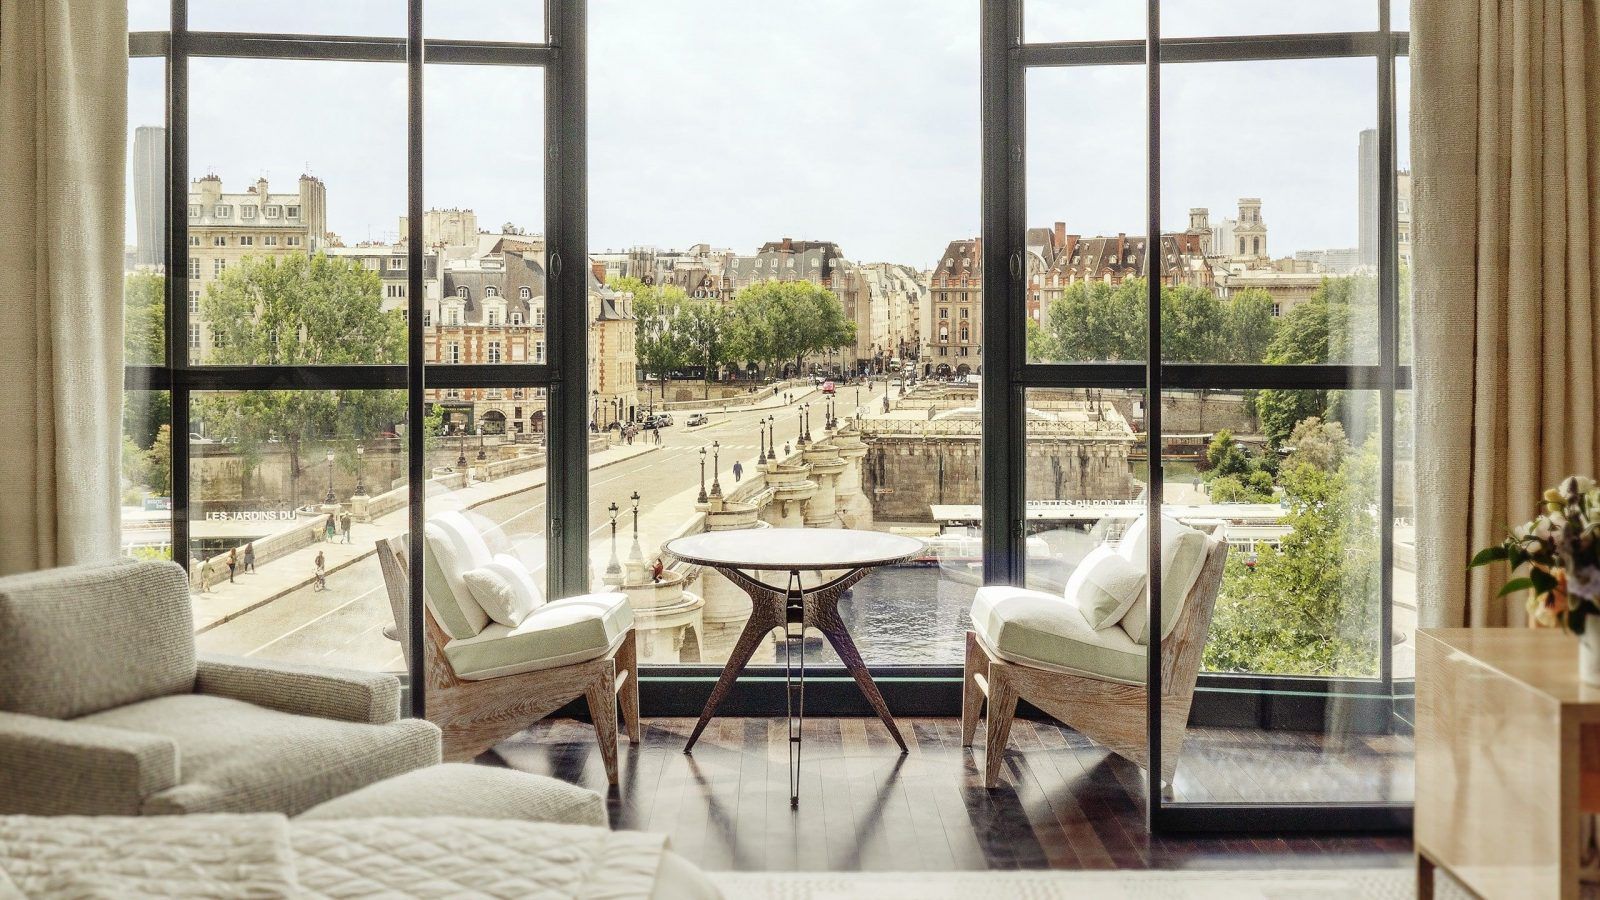 These are the best luxury hotels in Paris, France